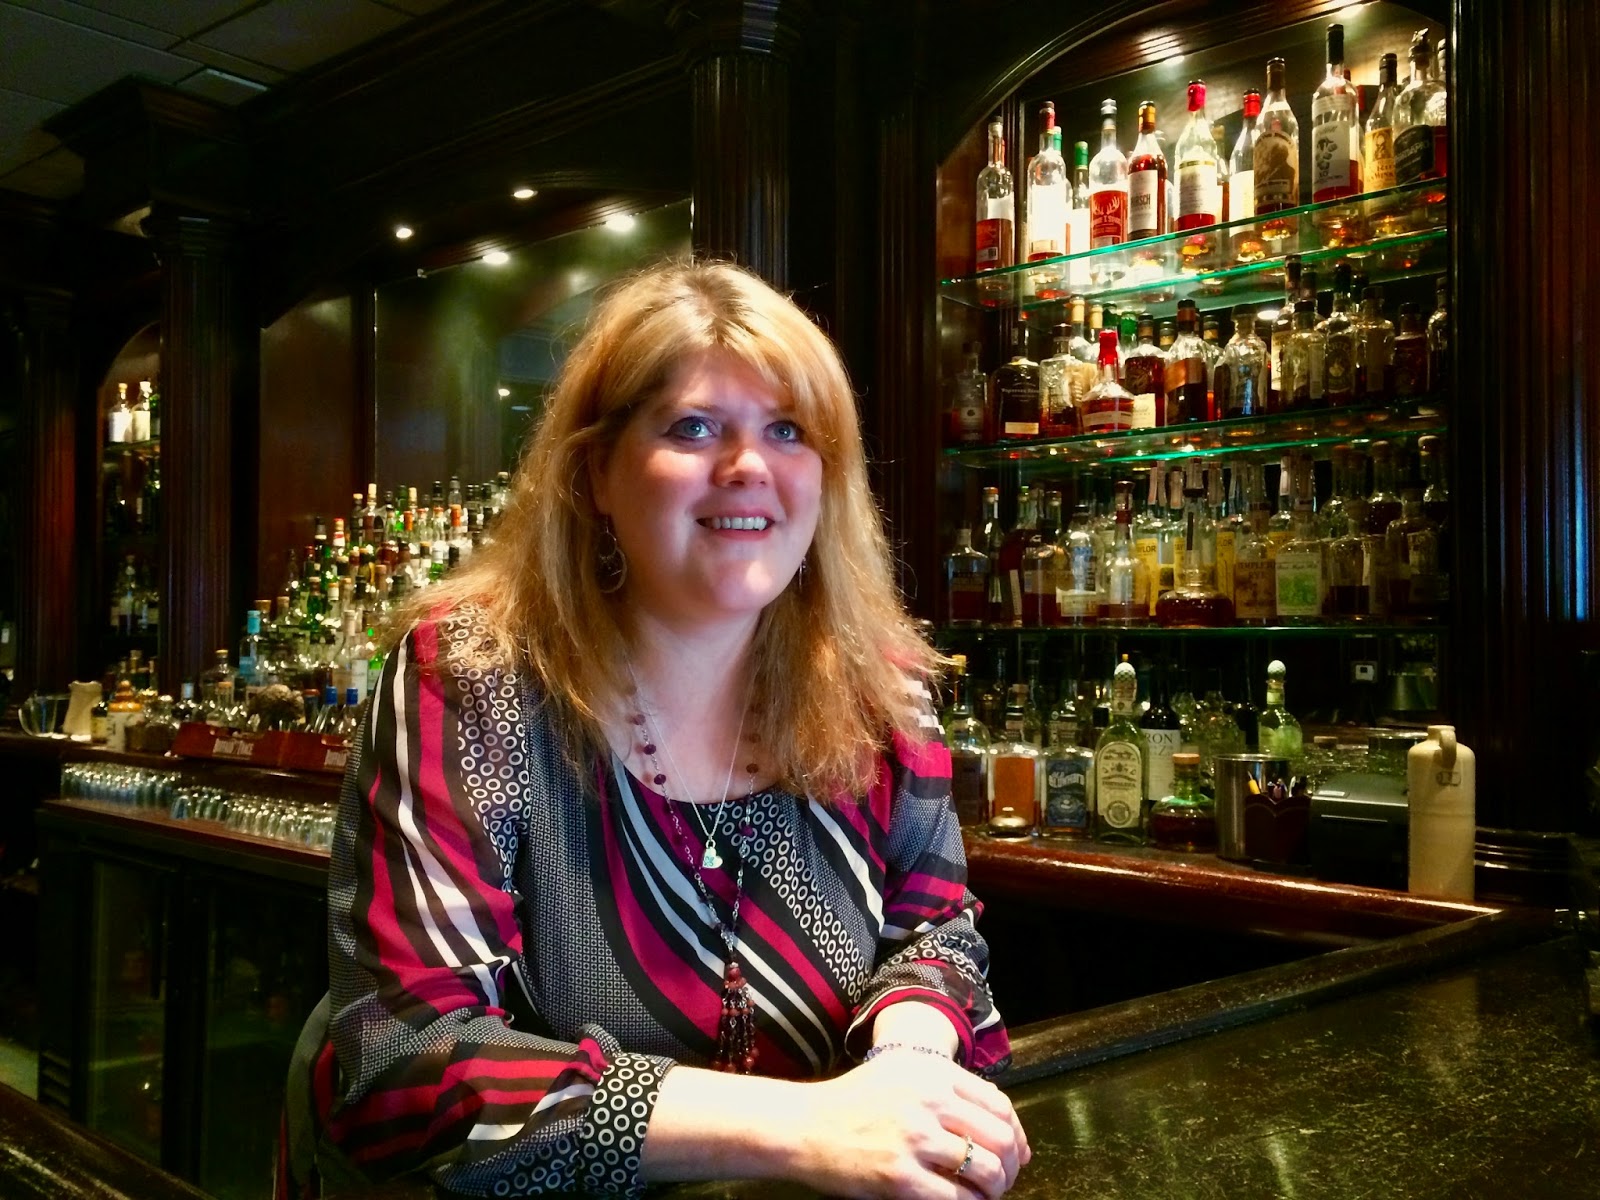 Brandi Lauck hanging out behind the bar while Arthur rambles on about whiskey